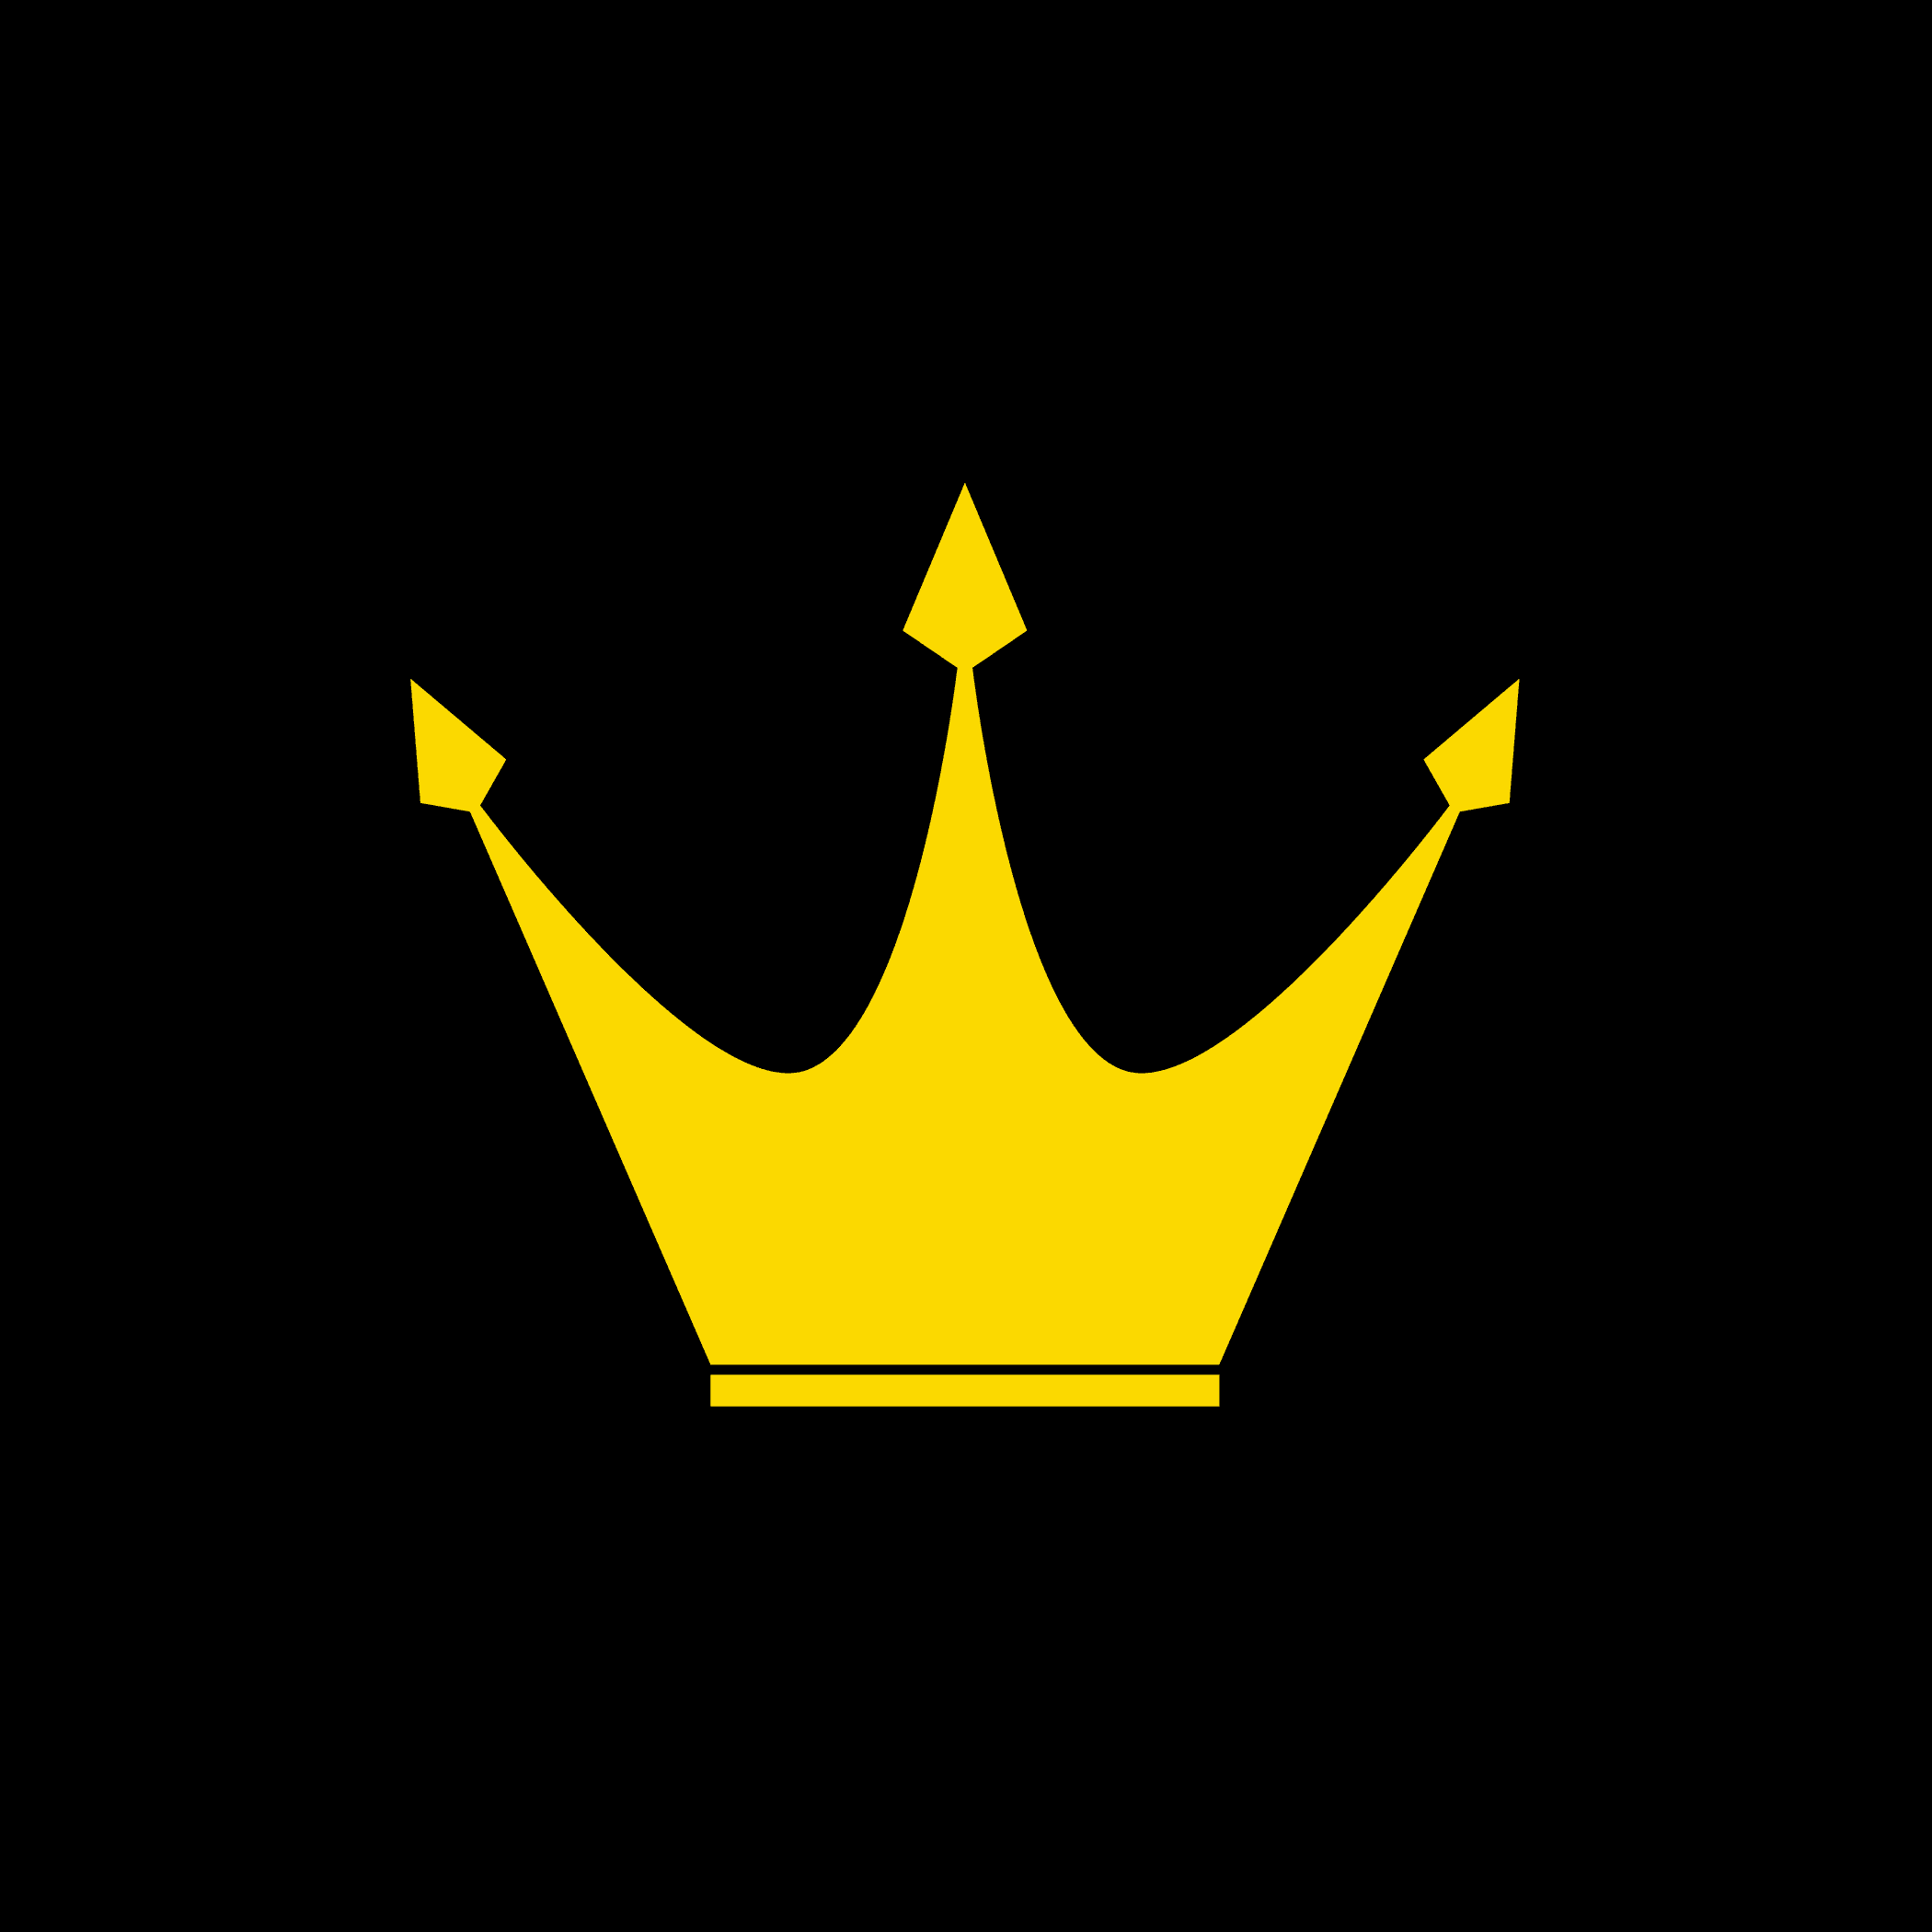 A yellow crown is on a black background.